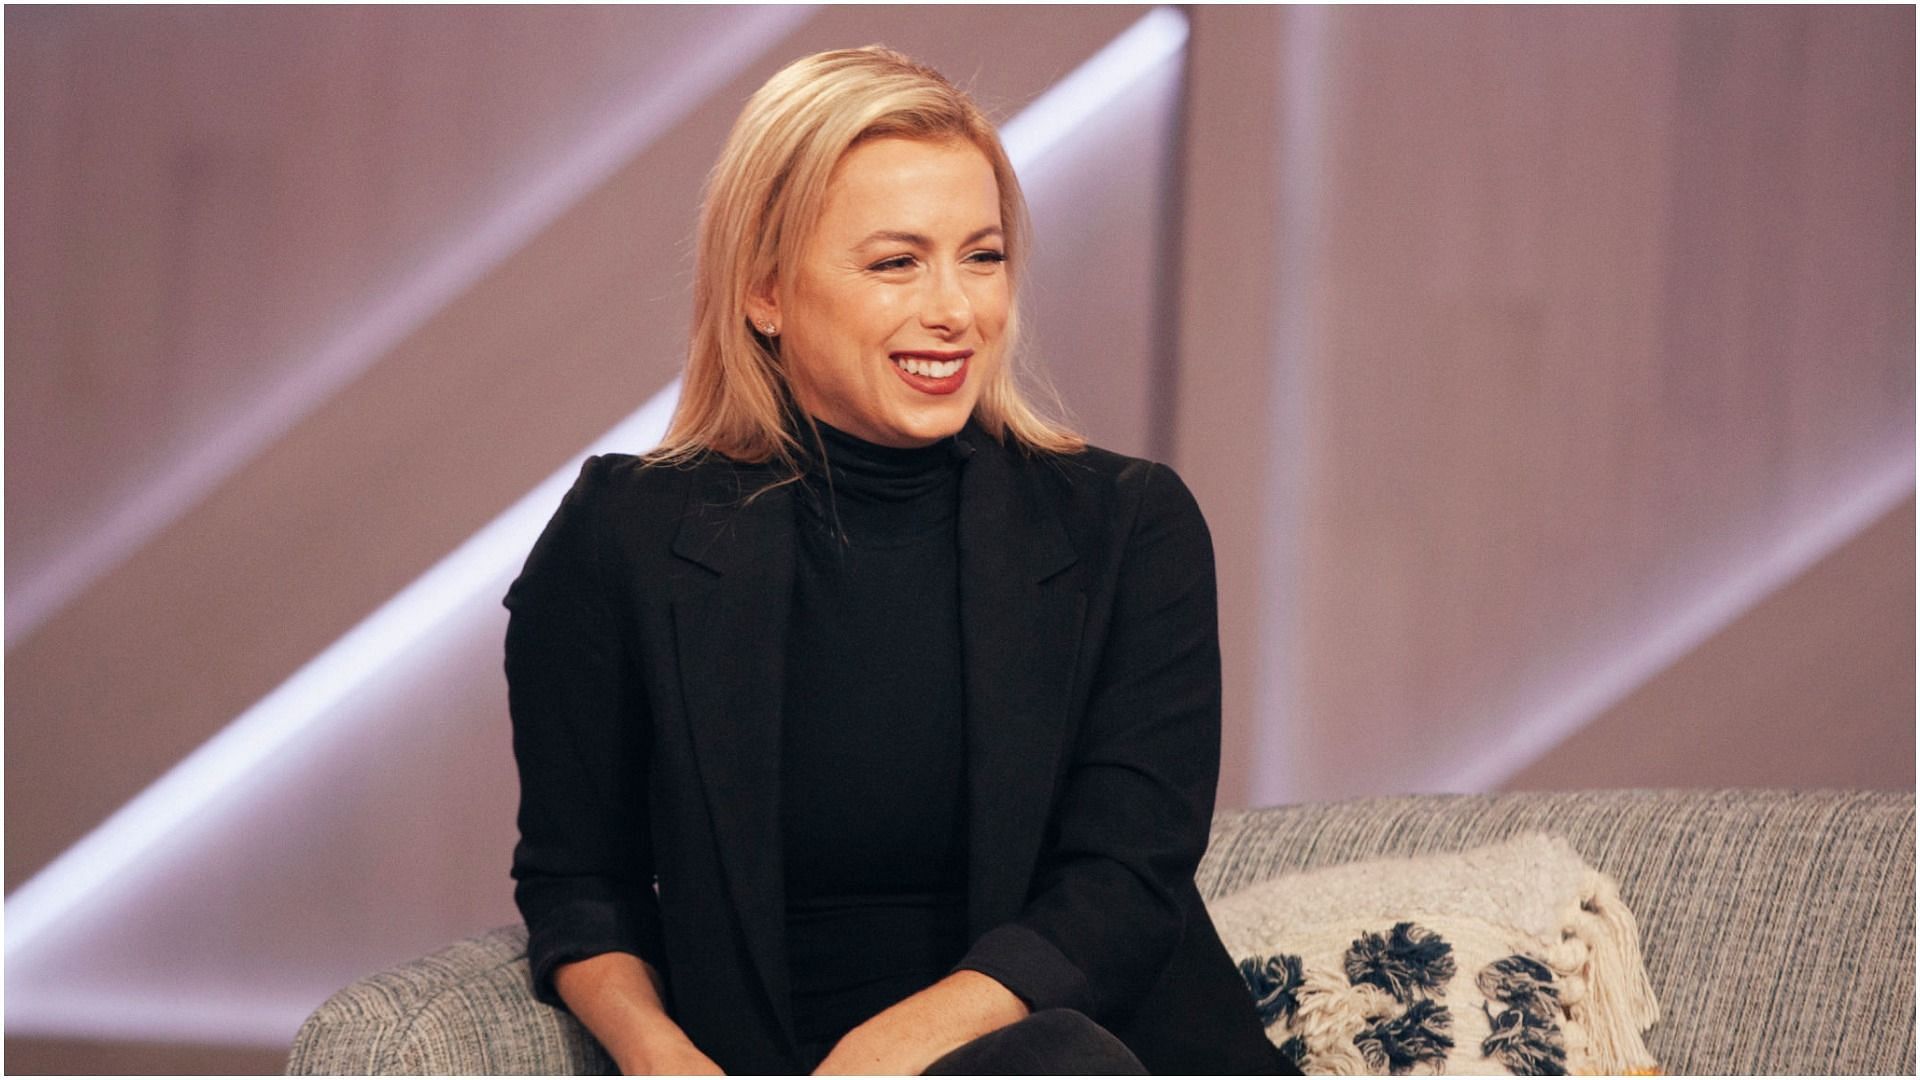 Iliza Shlesinger welcomed a baby girl with her husband, Noah Galuten (Image via Weiss Eubanks/Getty Images)